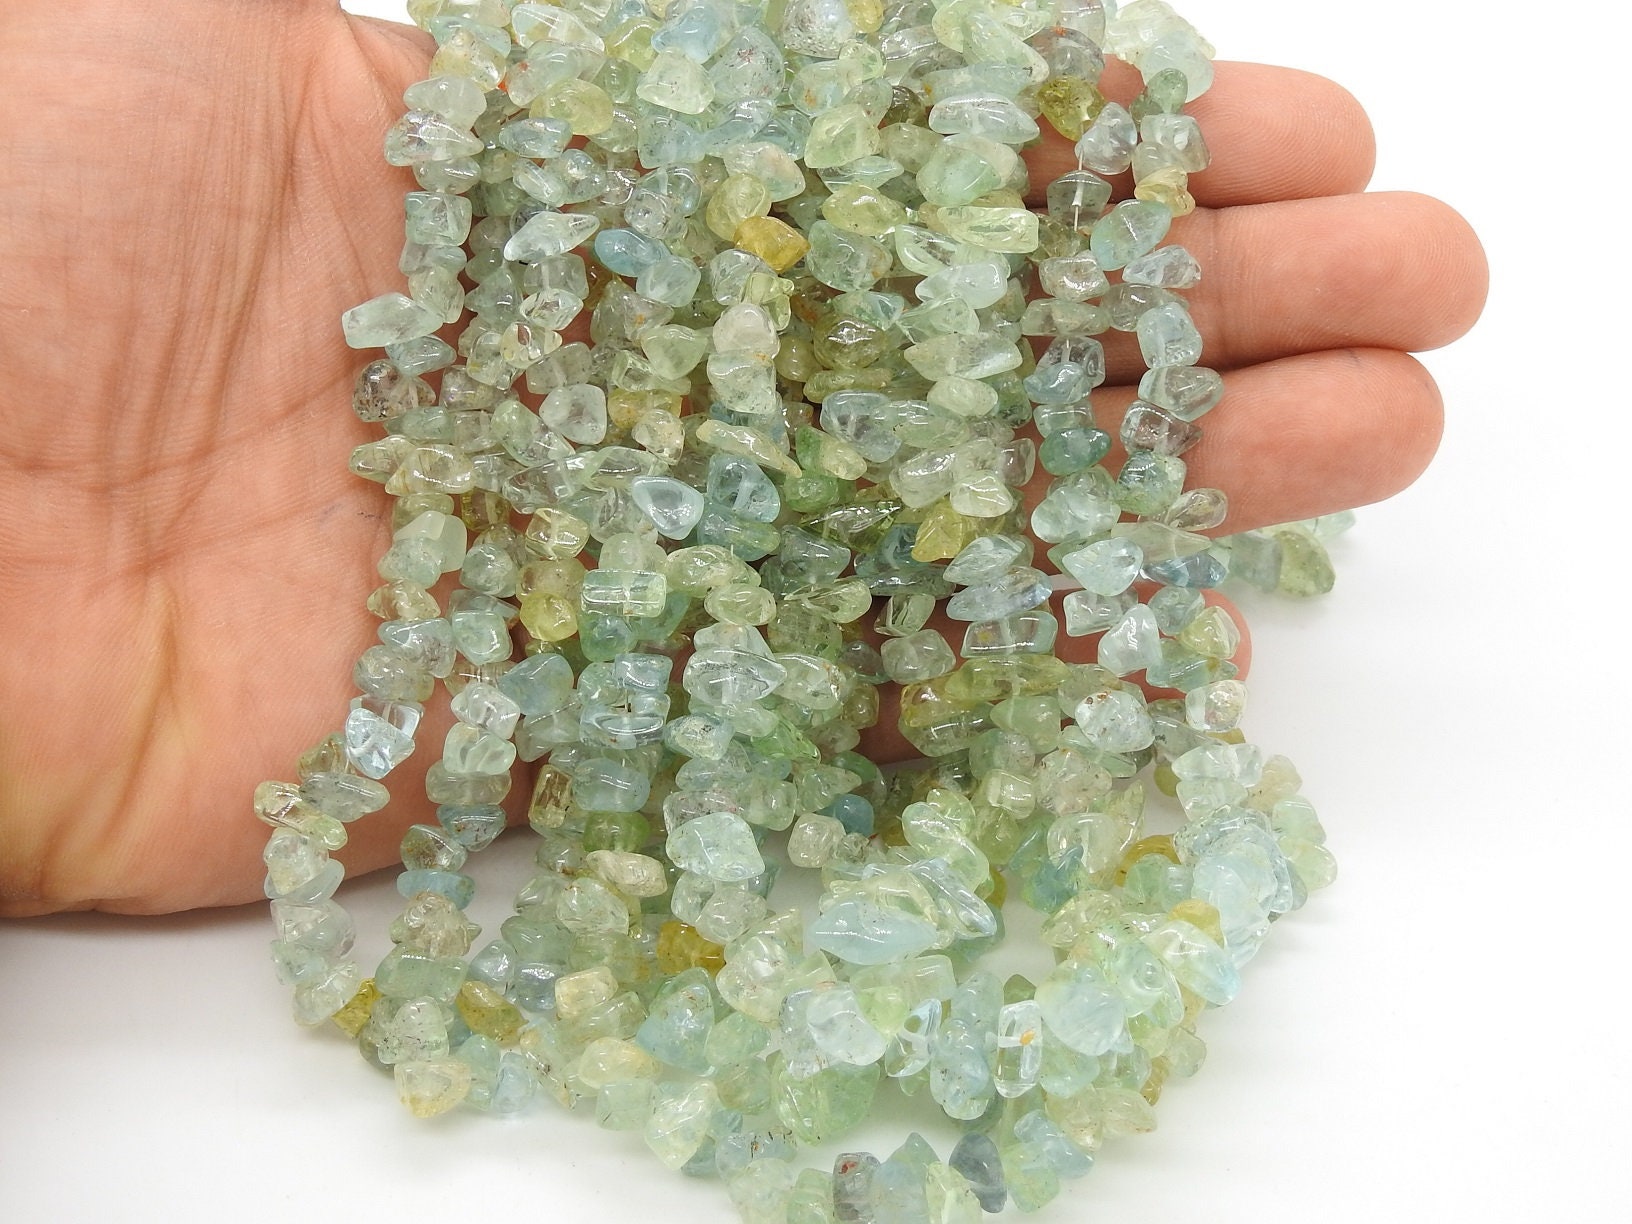 100%Natural,Aquamarine Polished Rough Beads,Anklets,Chips,Uncut 10X5To5X4MM Approx,Wholesale Price,New Arrival RB1 | Save 33% - Rajasthan Living 17